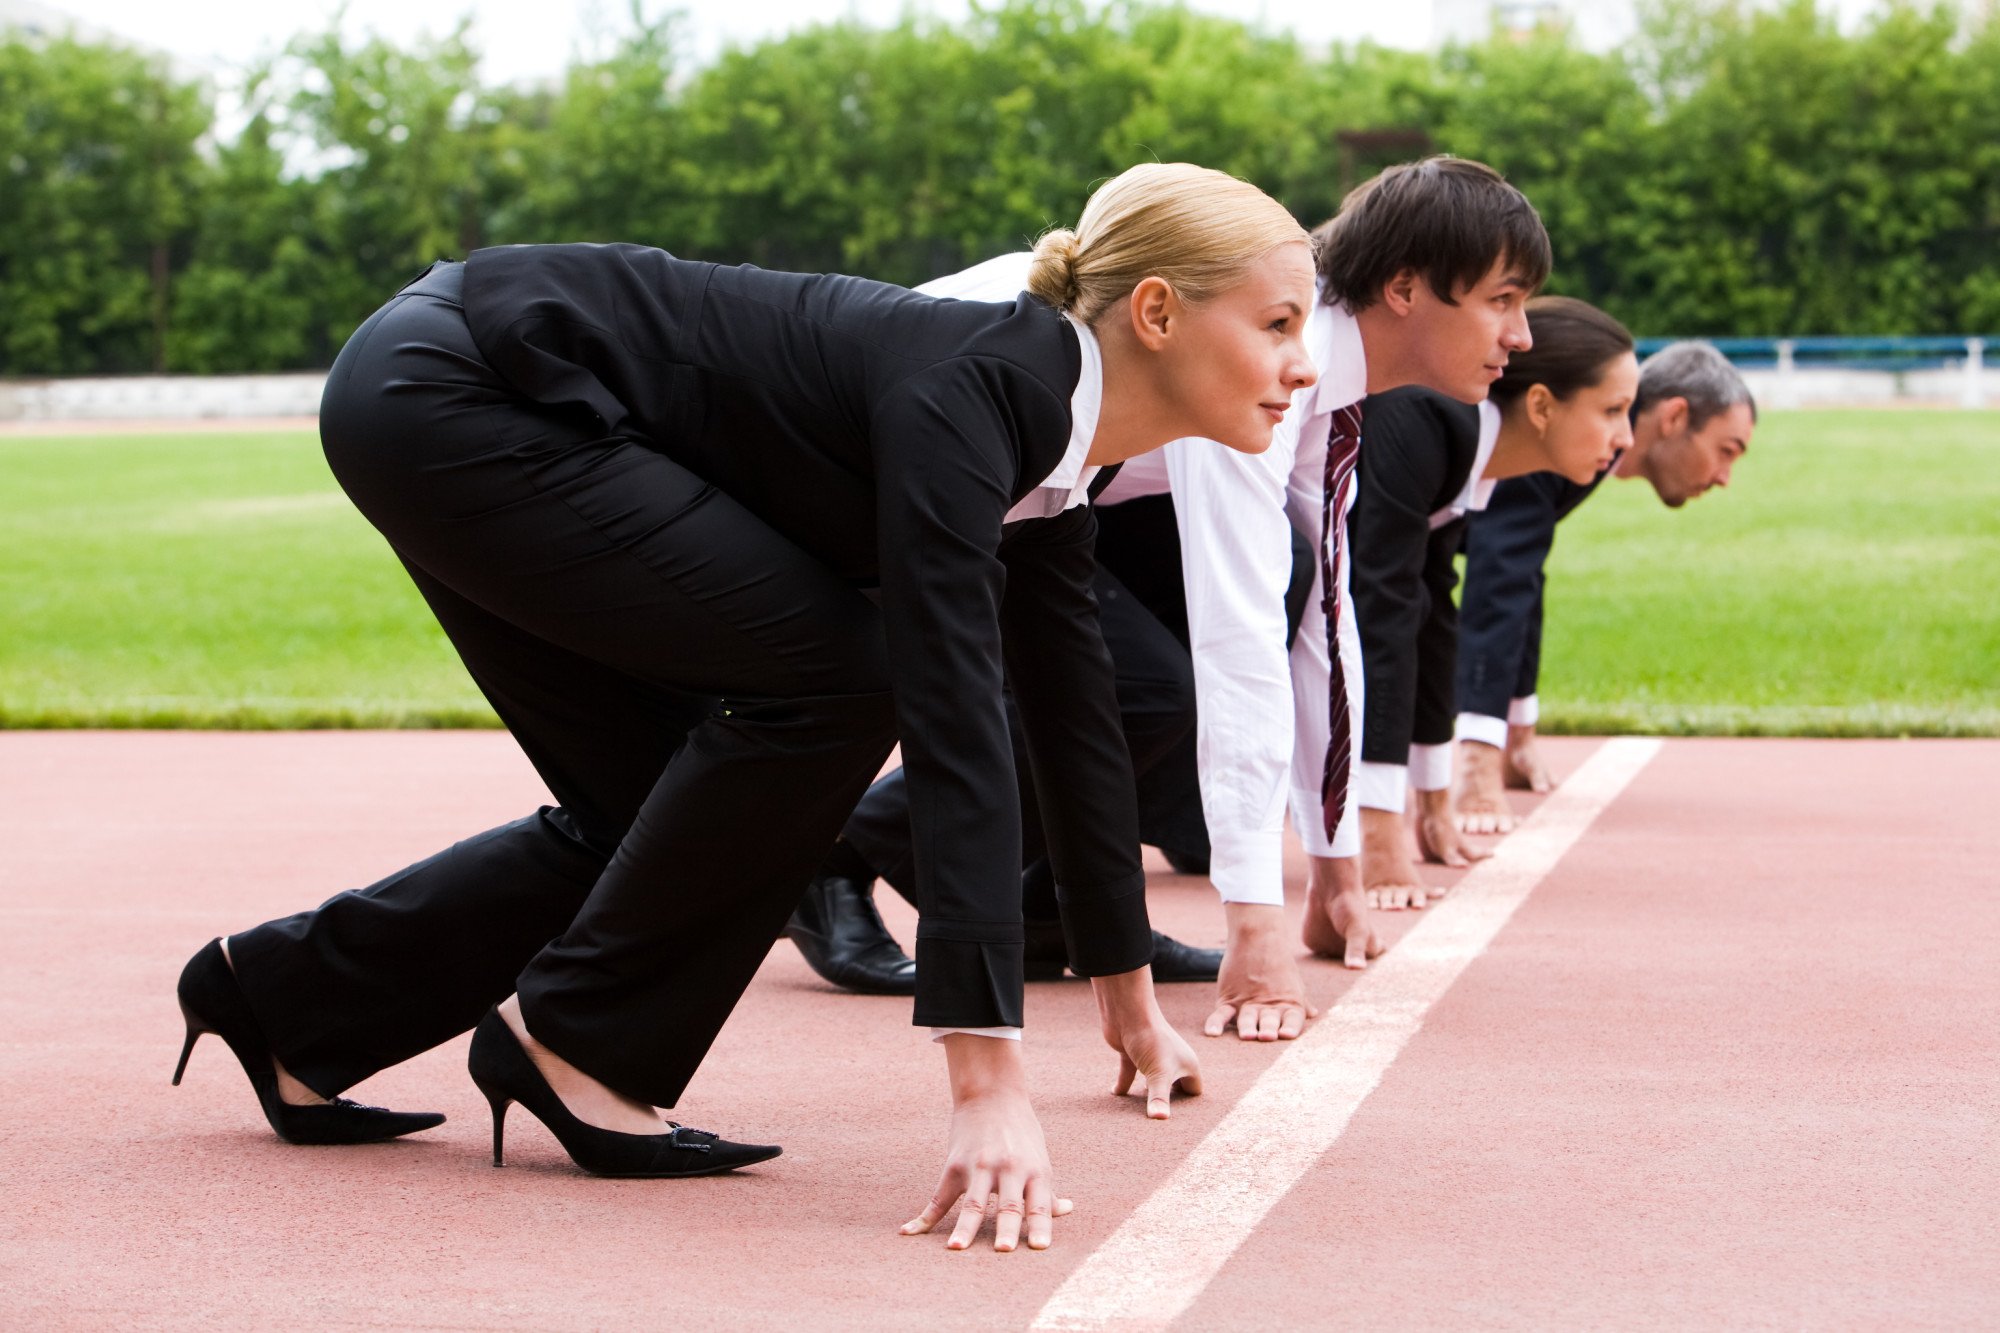 image of business men and women competing in a race resembling SEO competitors